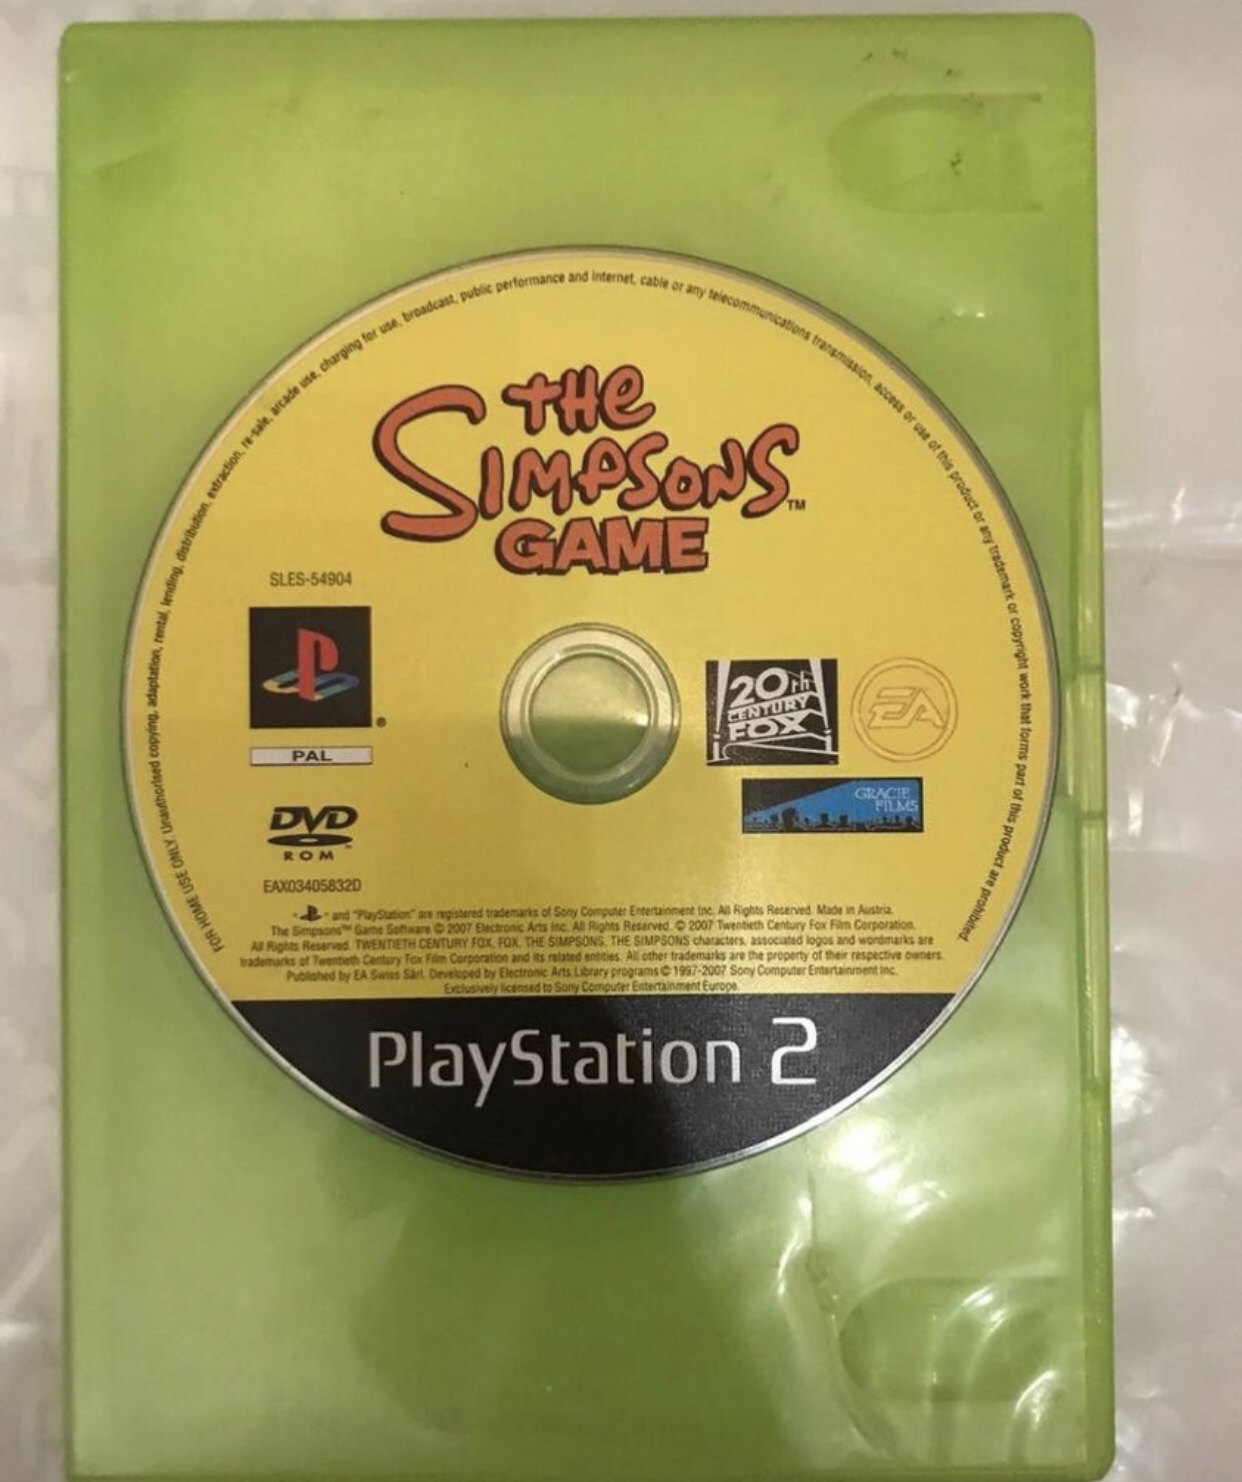 The simpsons game PS2 game